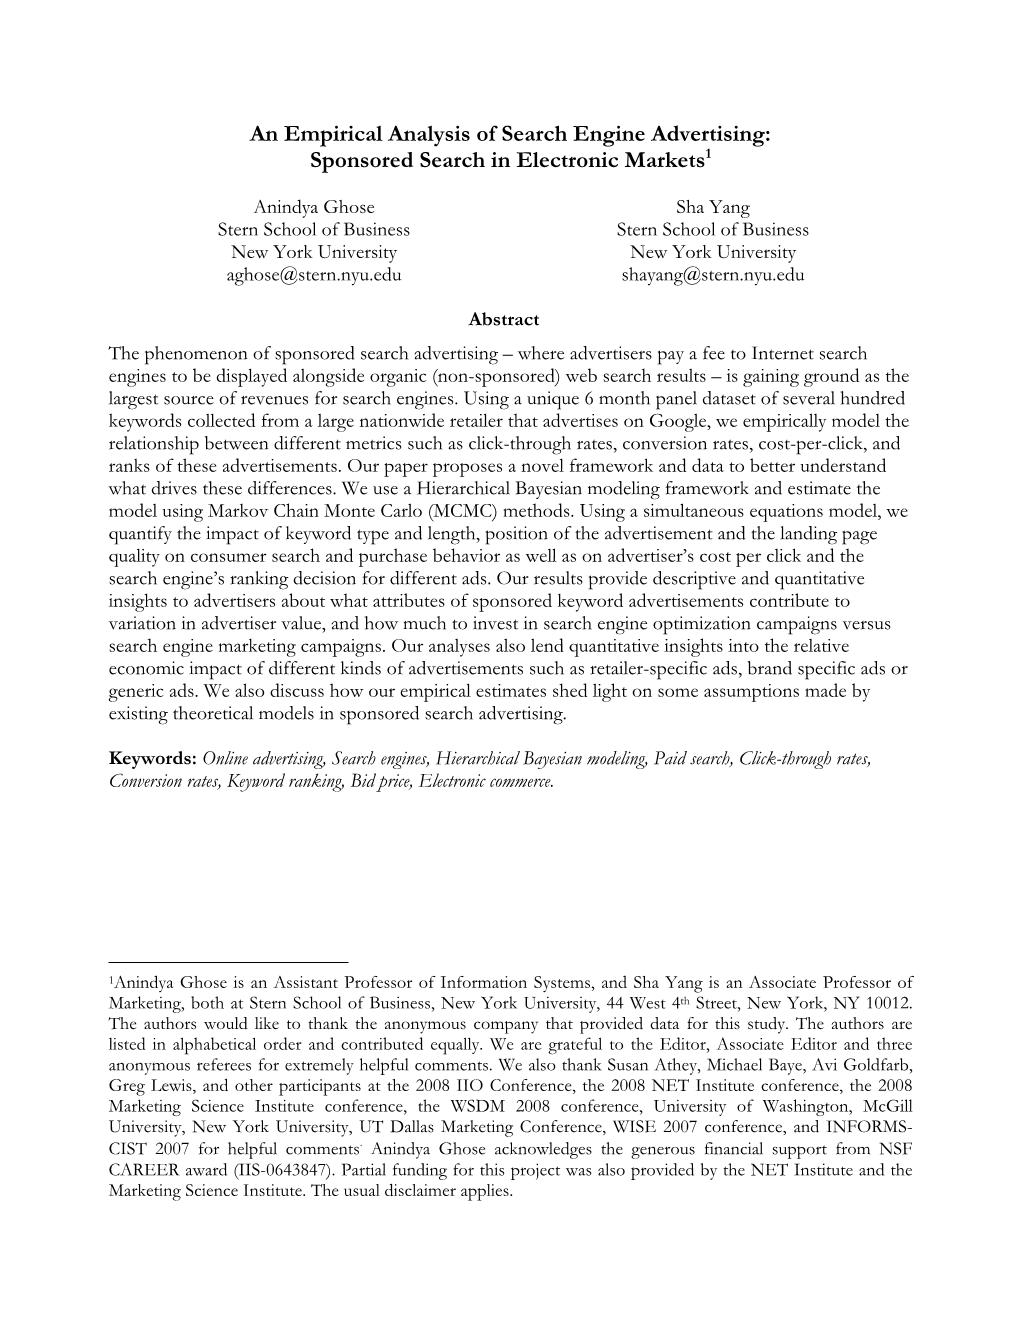 An Empirical Analysis of Search Engine Advertising: Sponsored Search in Electronic Markets1